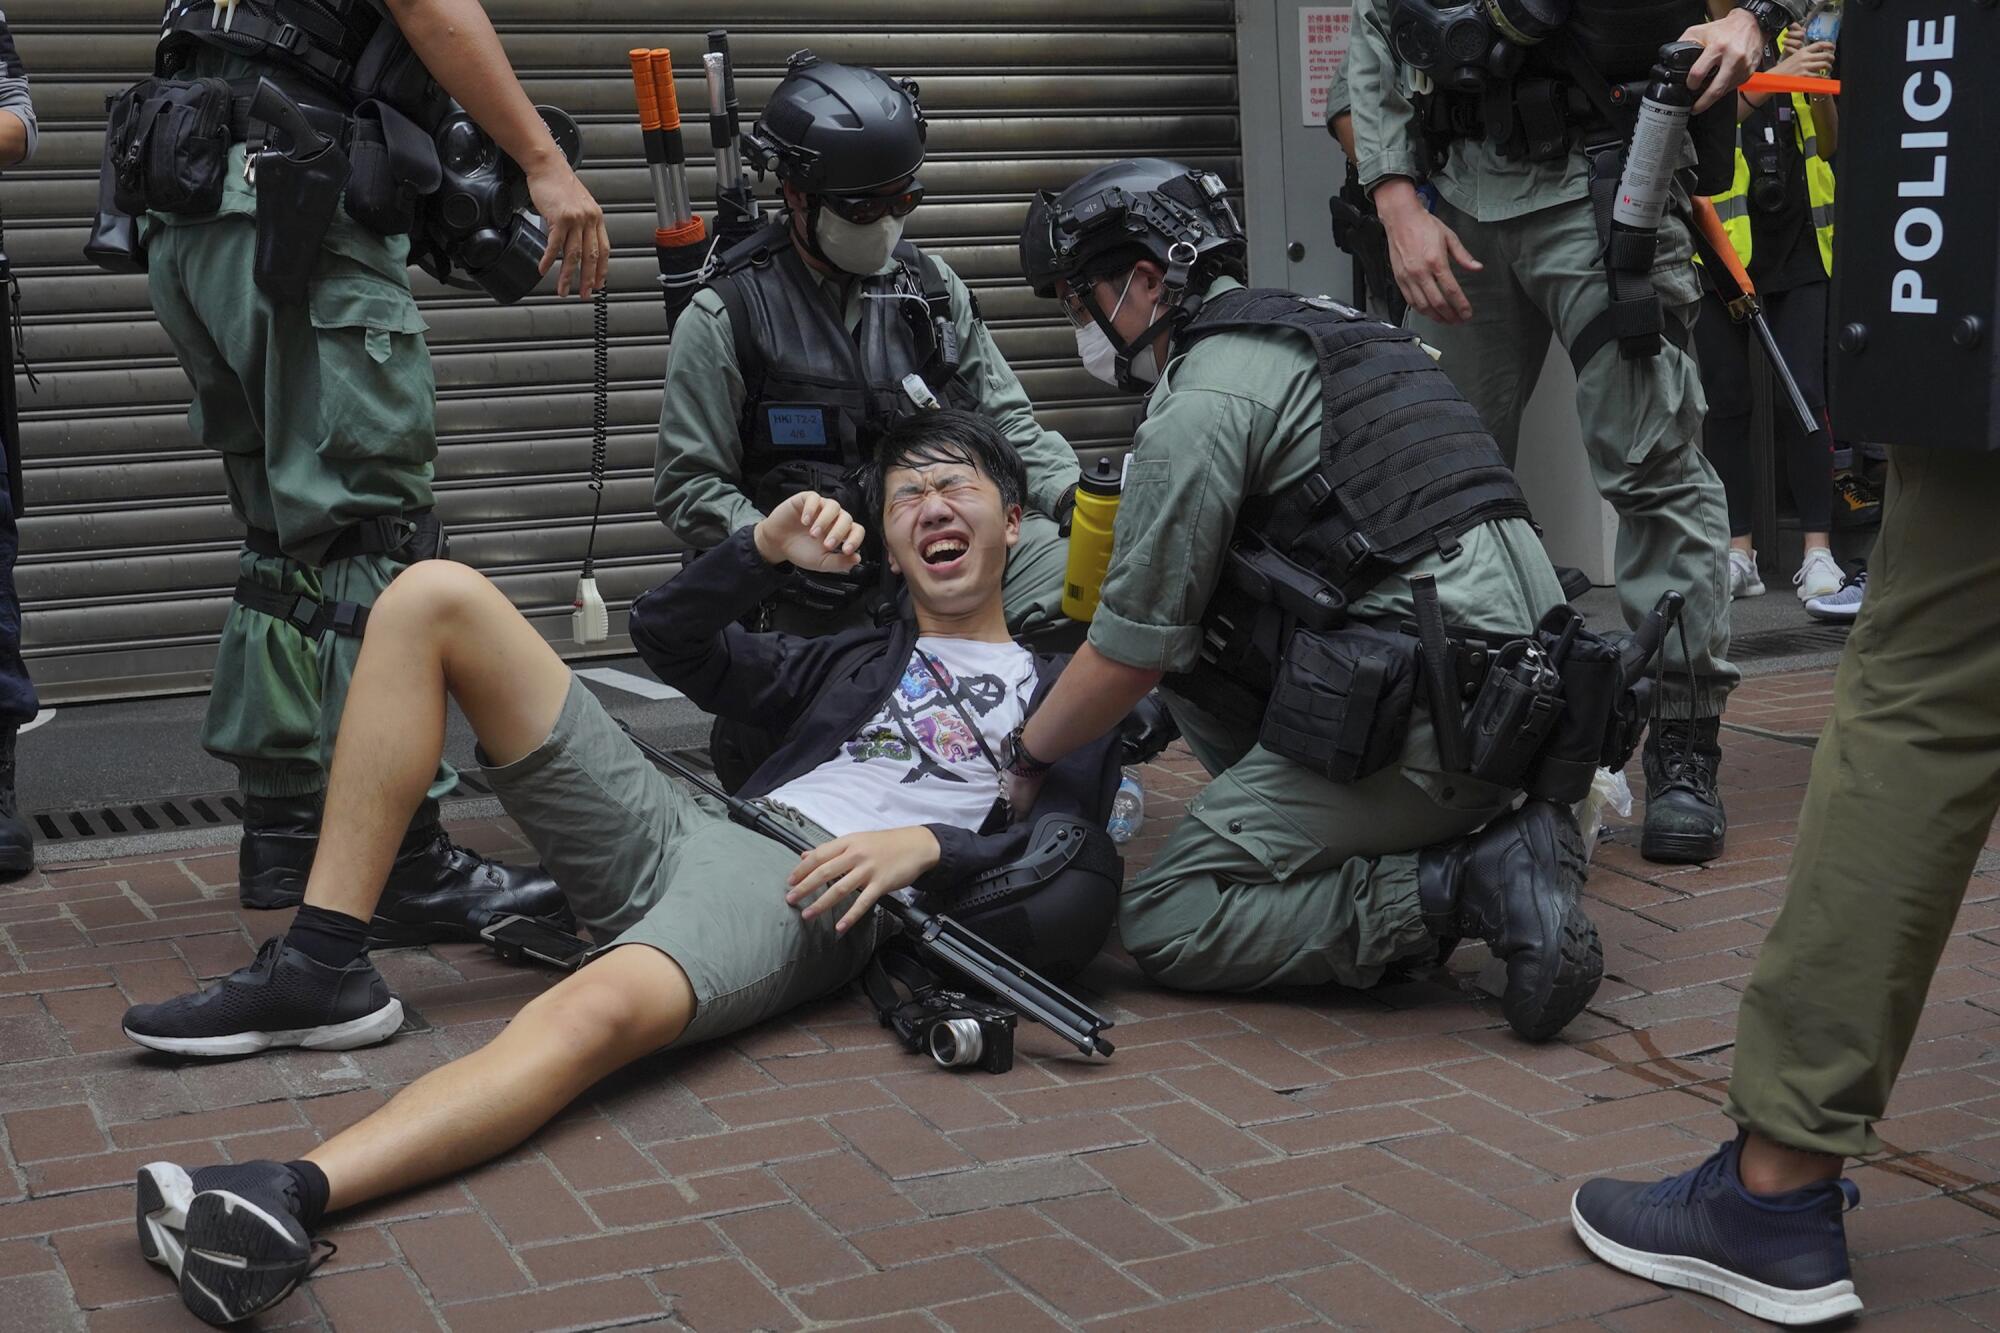 A reporter falls to the ground after being pepper sprayed by Hong Kong police during a protest in Causeway Bay on Wednesday.